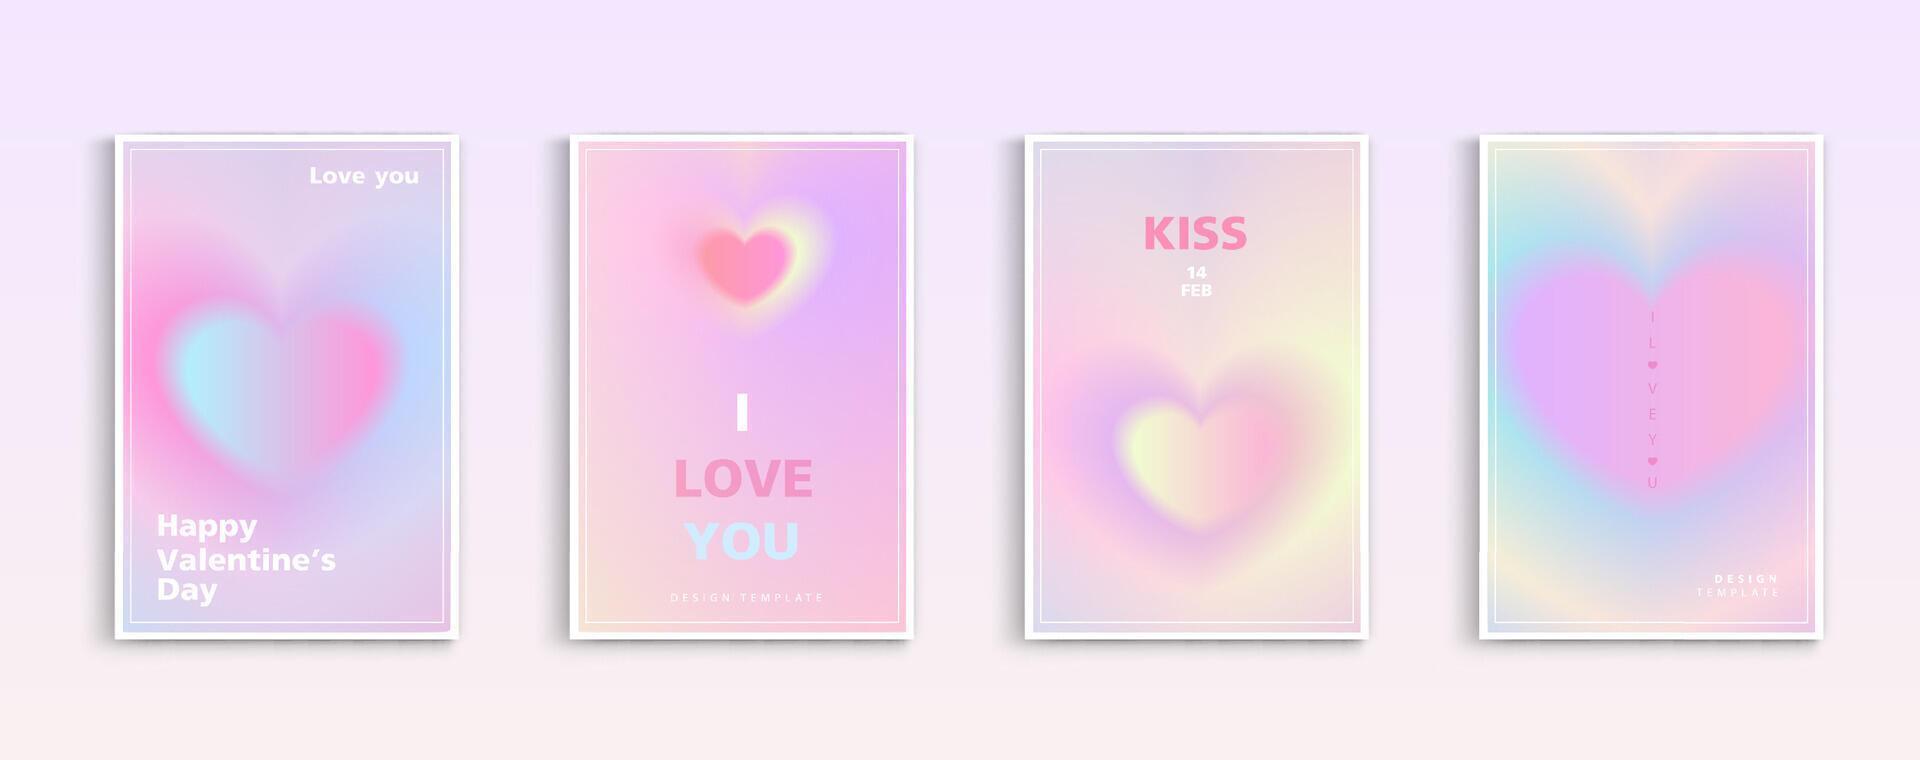 Happy Valentine's Day greeting cards. trendy gradients for brochures, advertising and postcard. romantic cute event flyers for banners or mobile social posts. vector design.